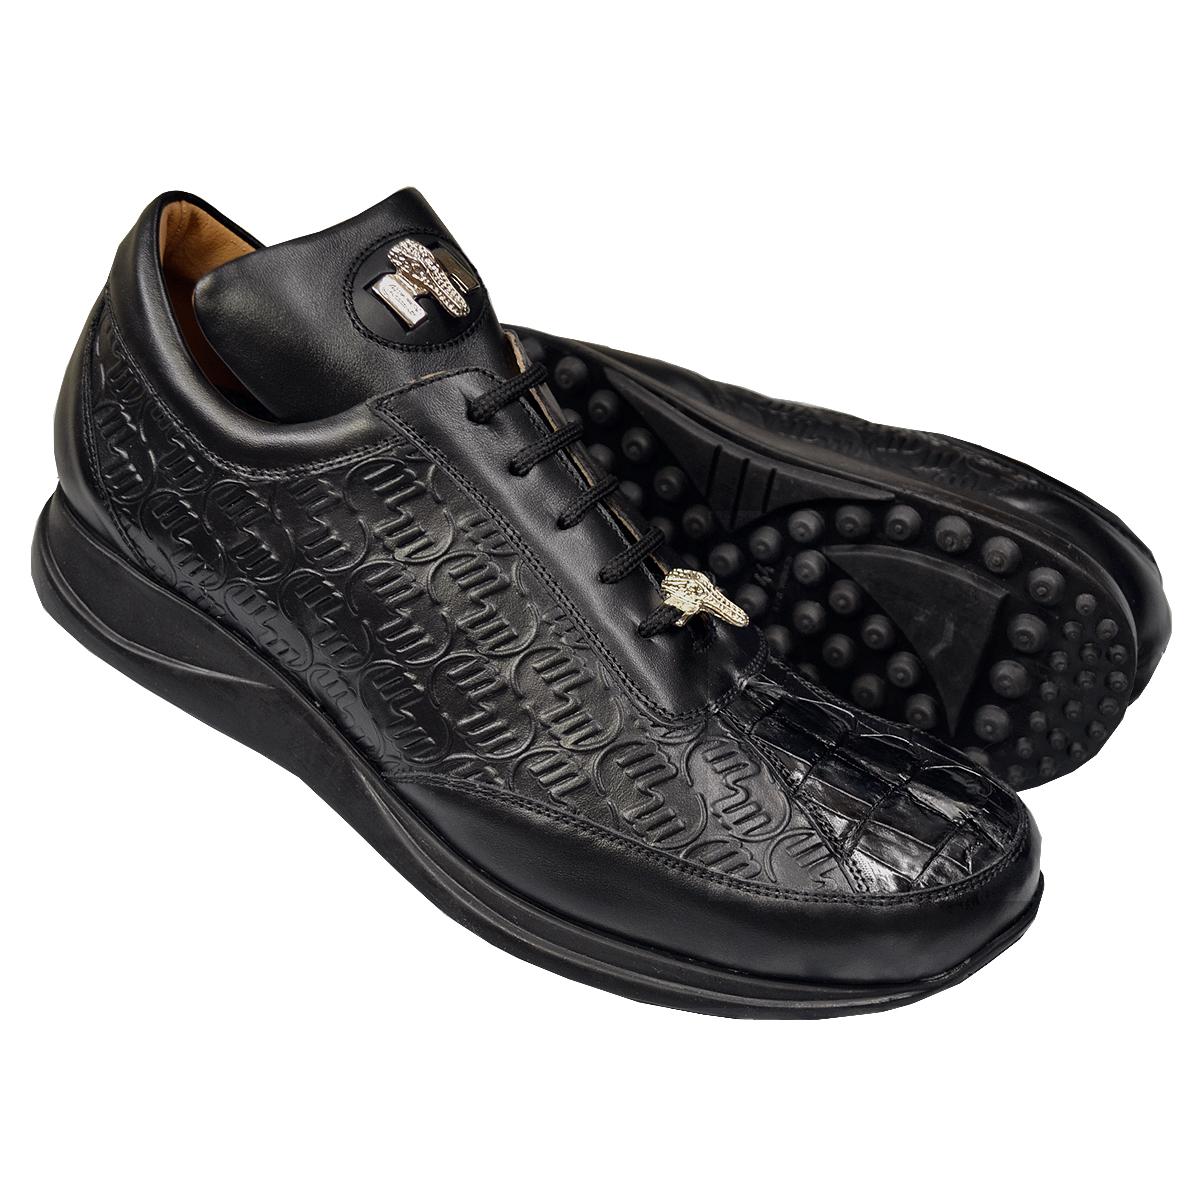 Mauri Shoes - A great combination of style and comfort these